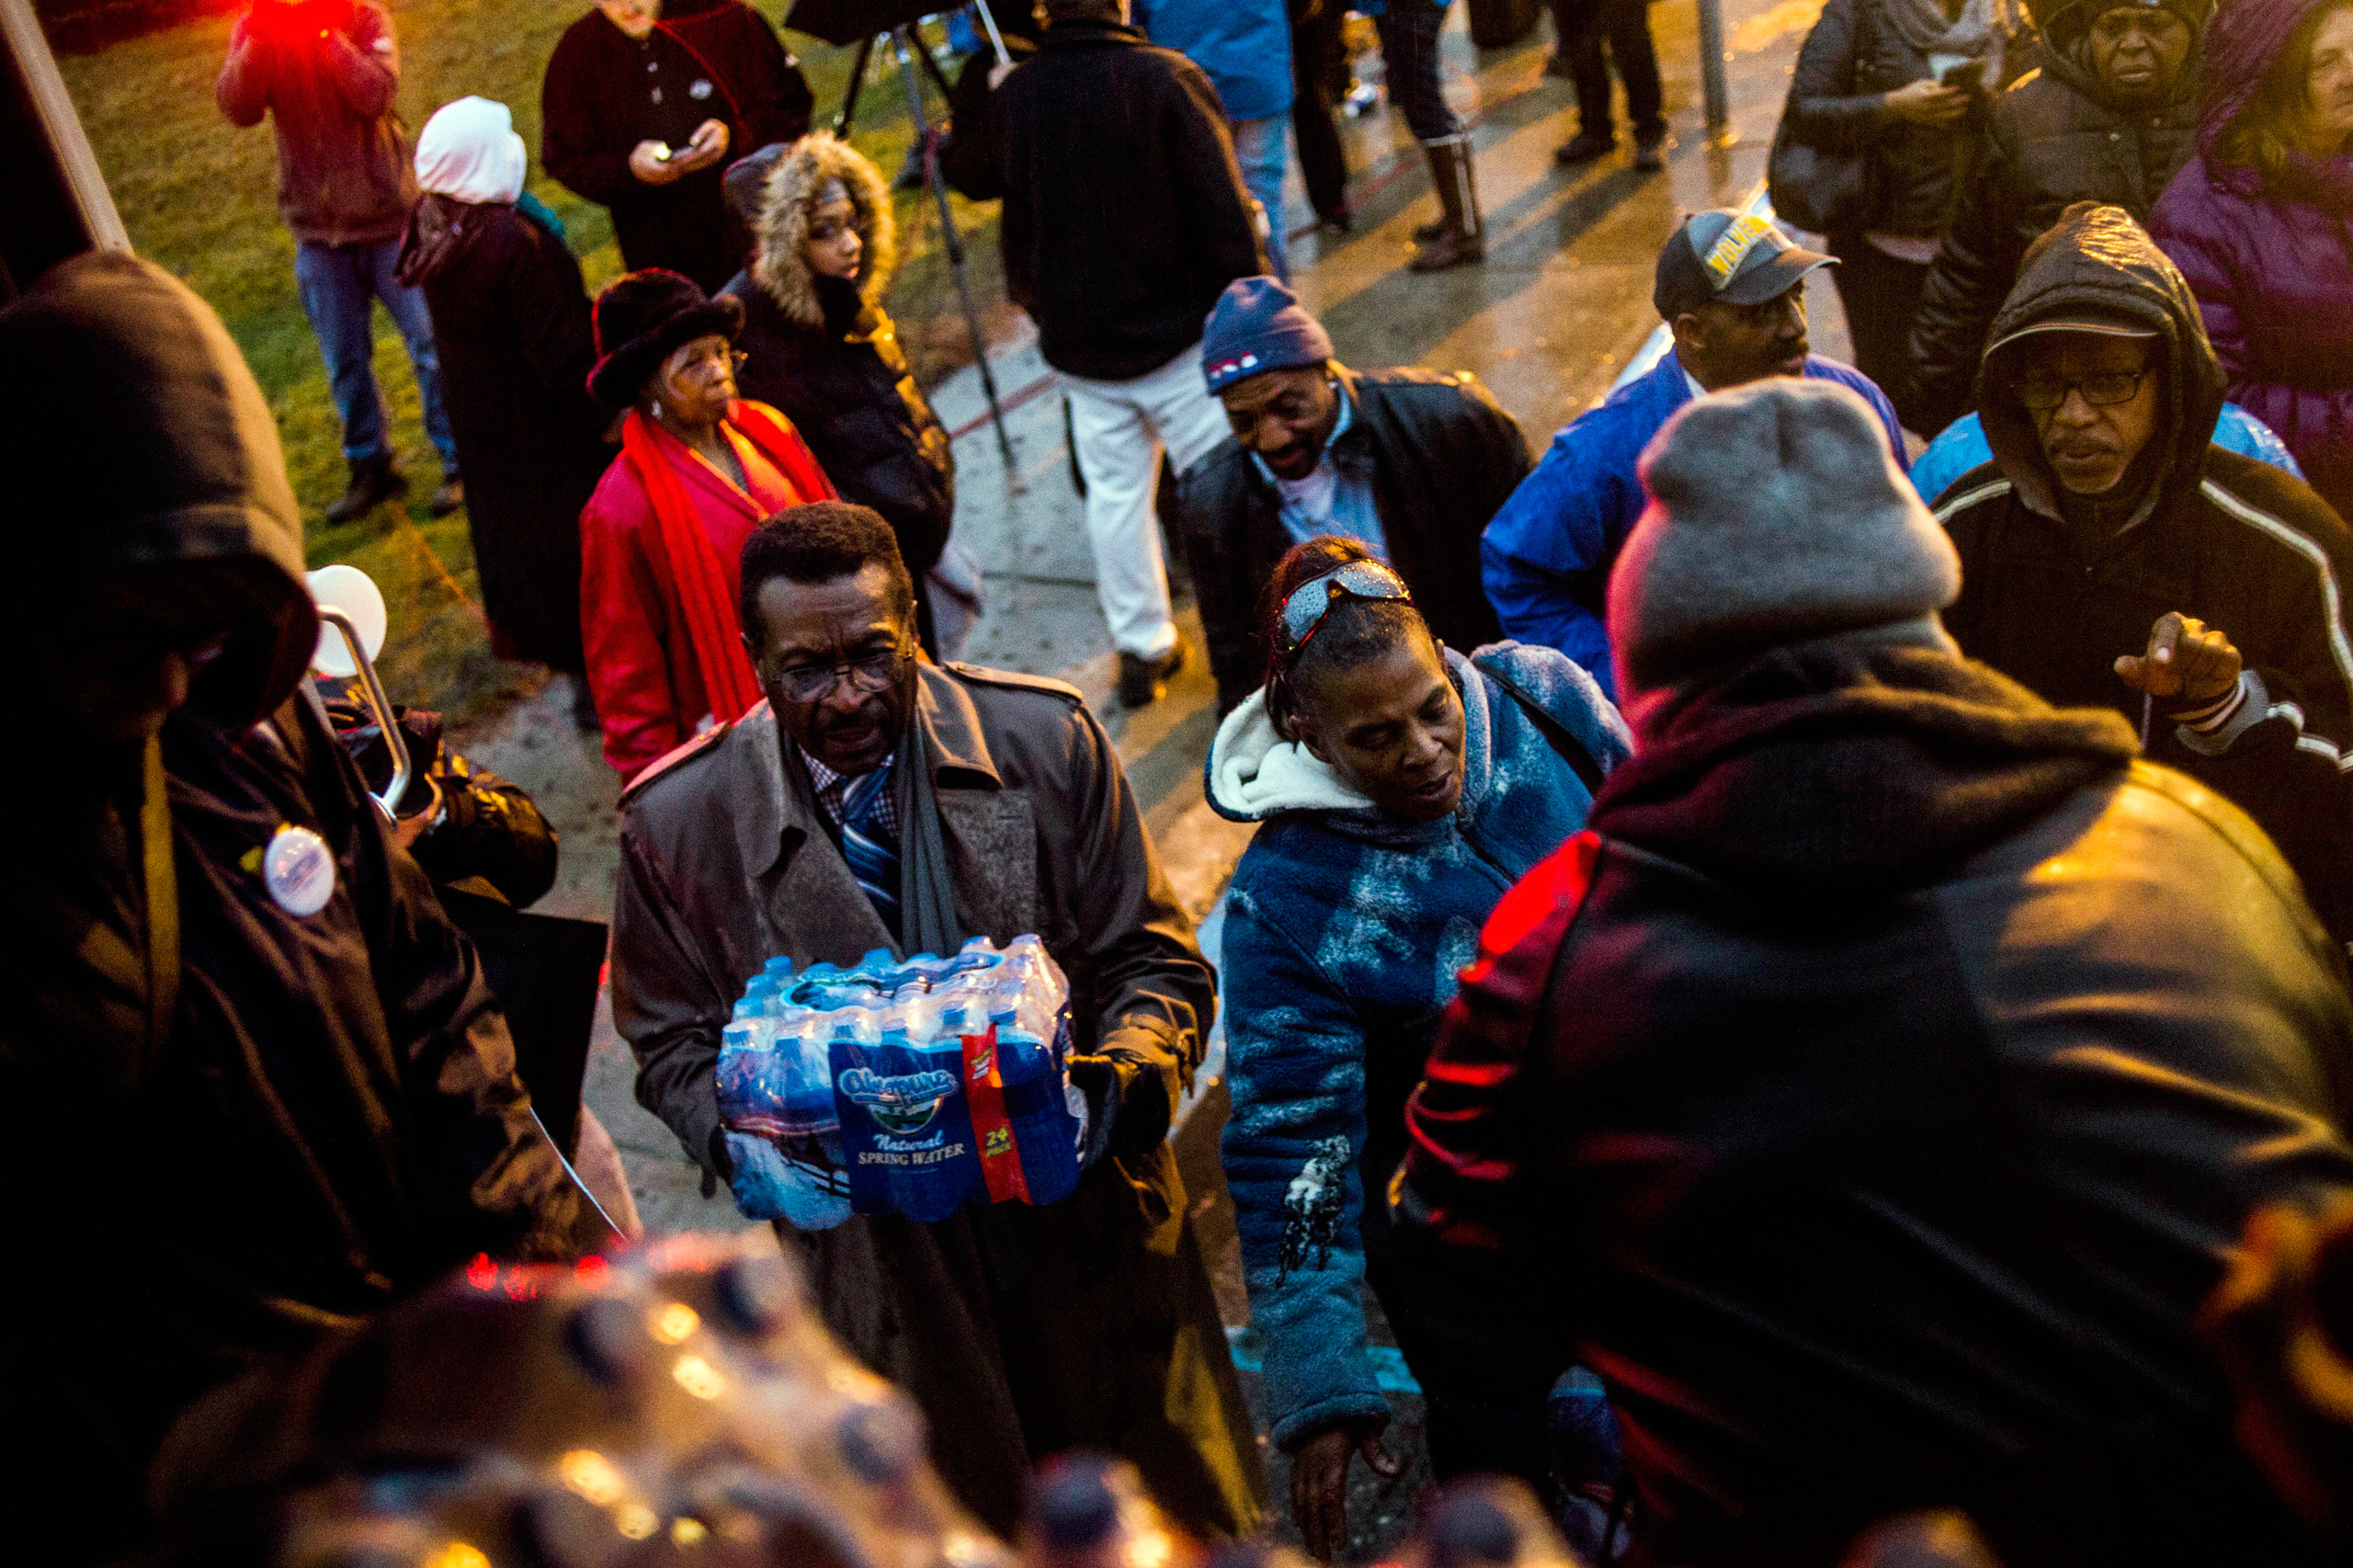 Flint residents line up for free bottled water as activists protest outside of City Hall to protest Michigan Gov. Rick Snyder's handling of the water crisis Friday, Jan. 8, 2016 in Flint. Mich. (Jake May/The Flint Journal-MLive.com via AP) LOCAL TELEVISION OUT; LOCAL INTERNET OUT; MANDATORY CREDIT